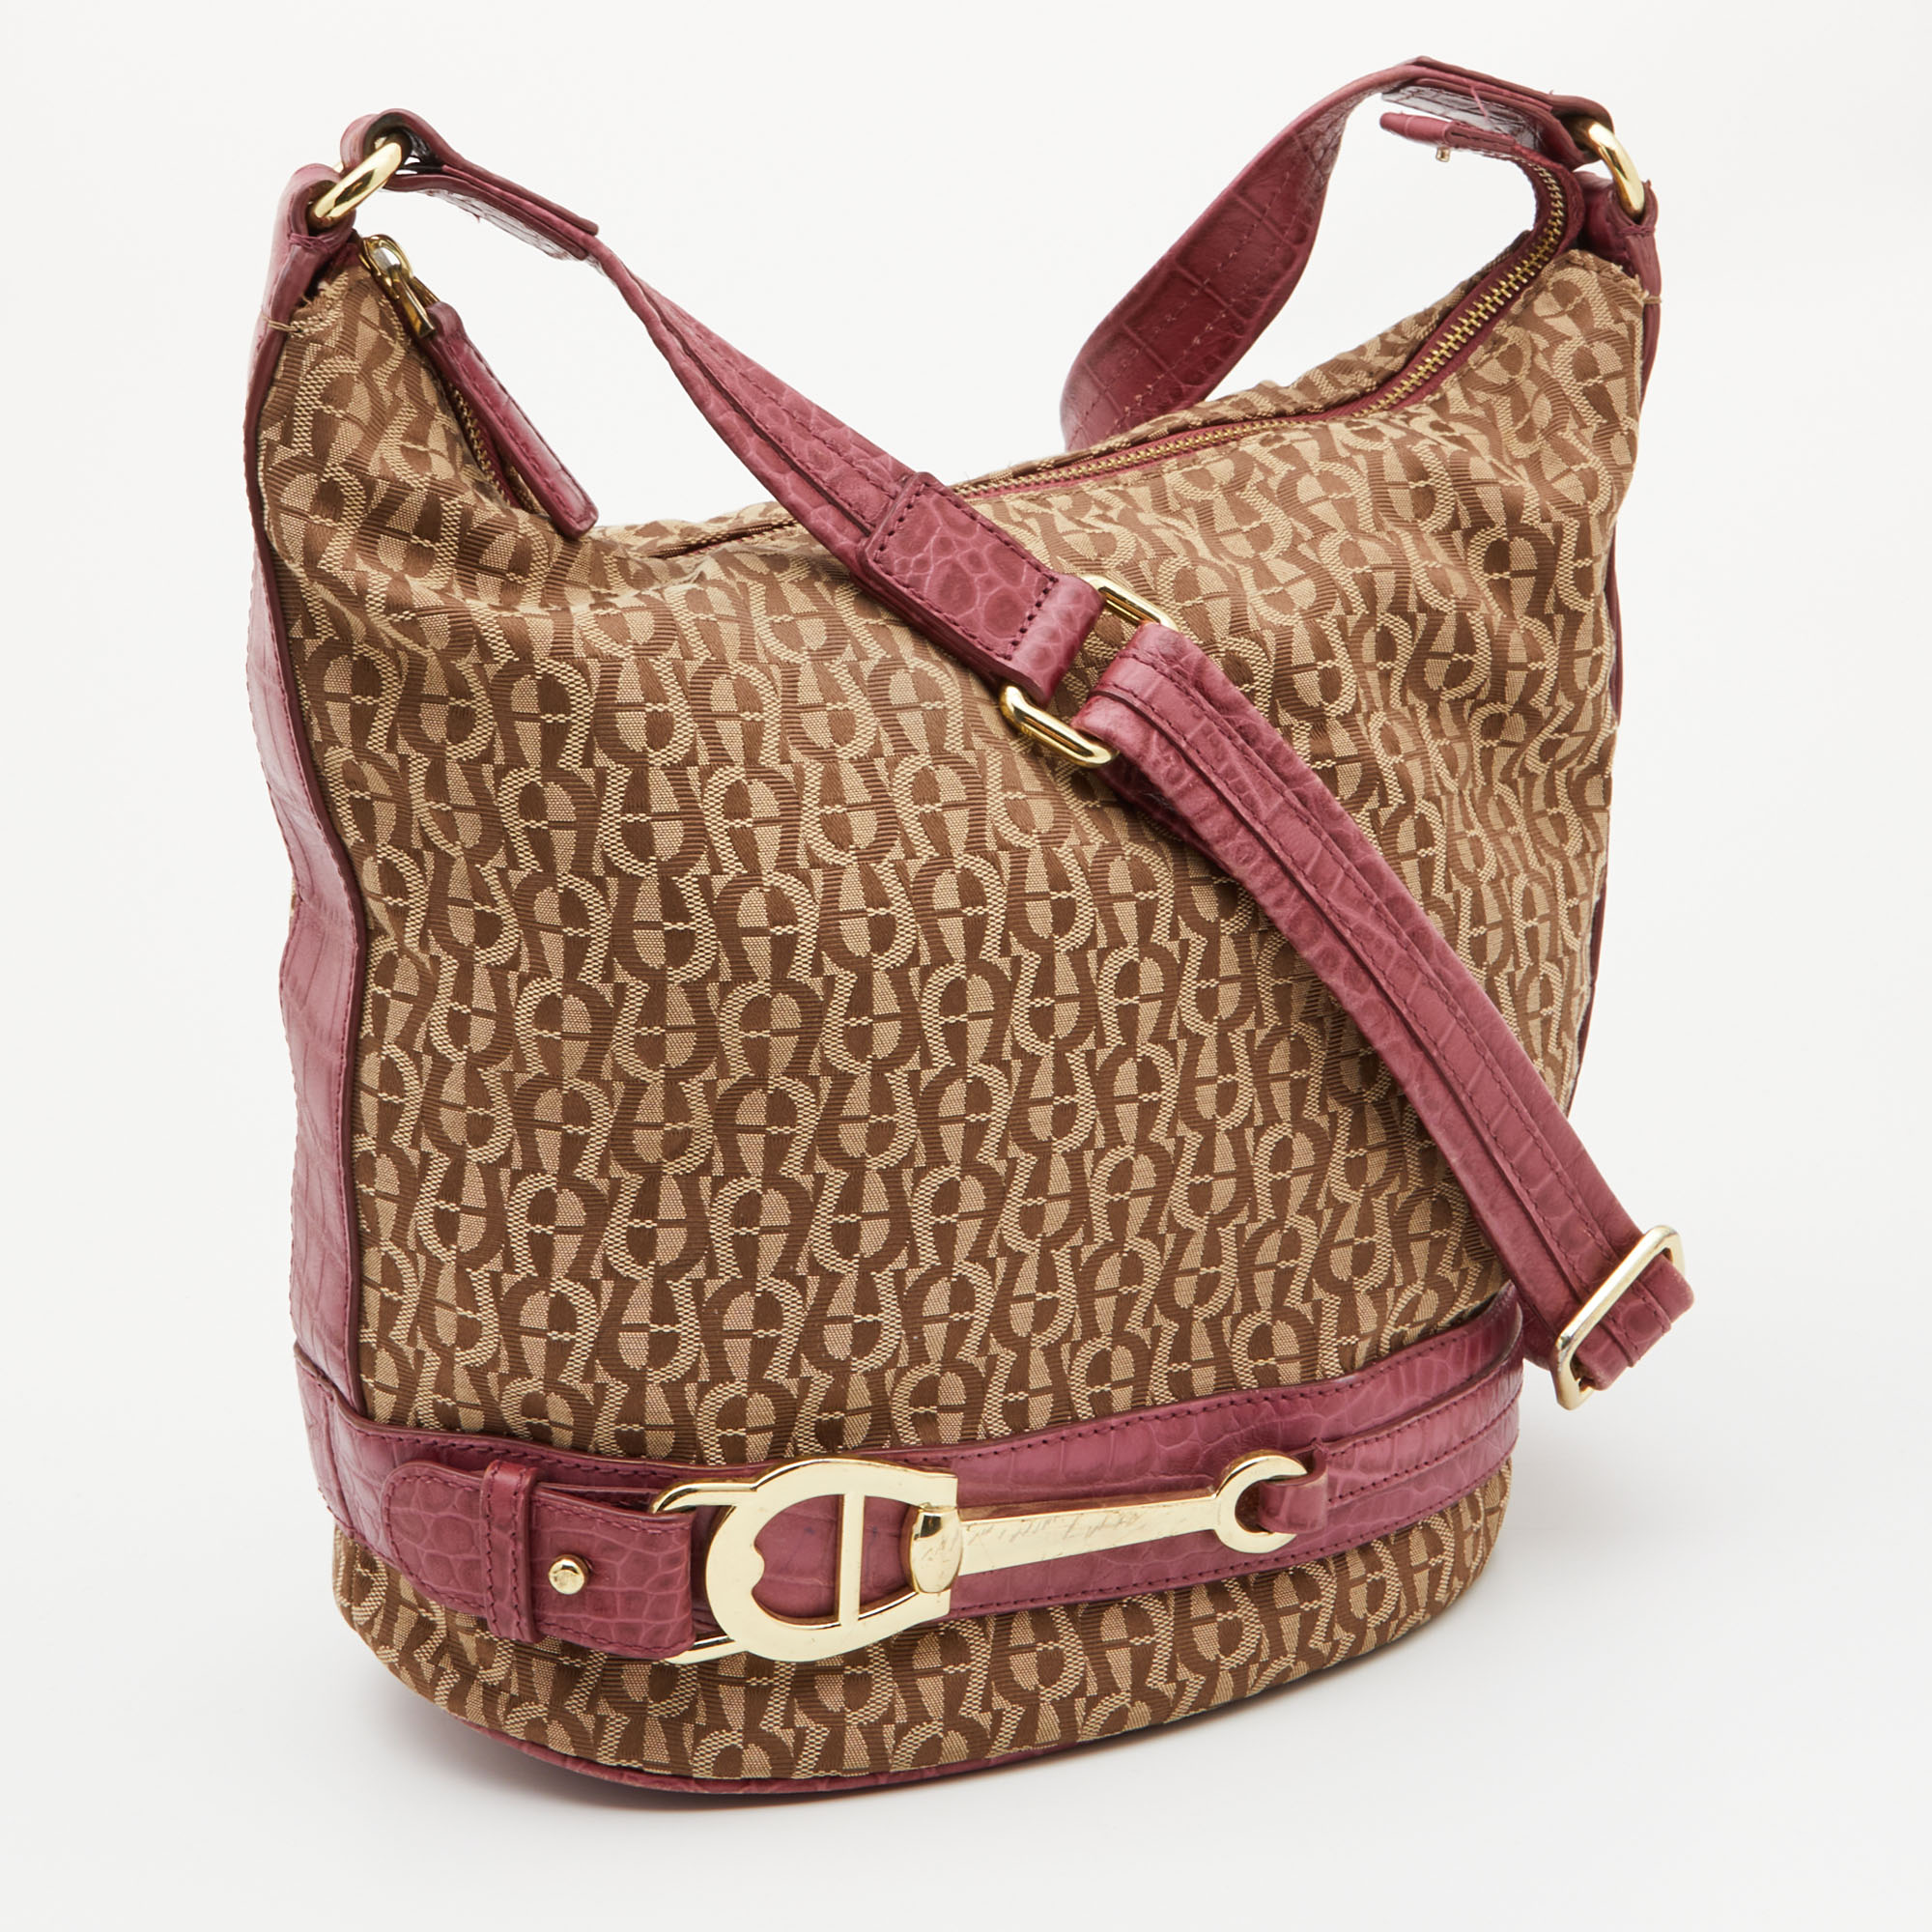 Aigner Beige/Pink Signature Canvas And Croc Embossed Leather Hobo